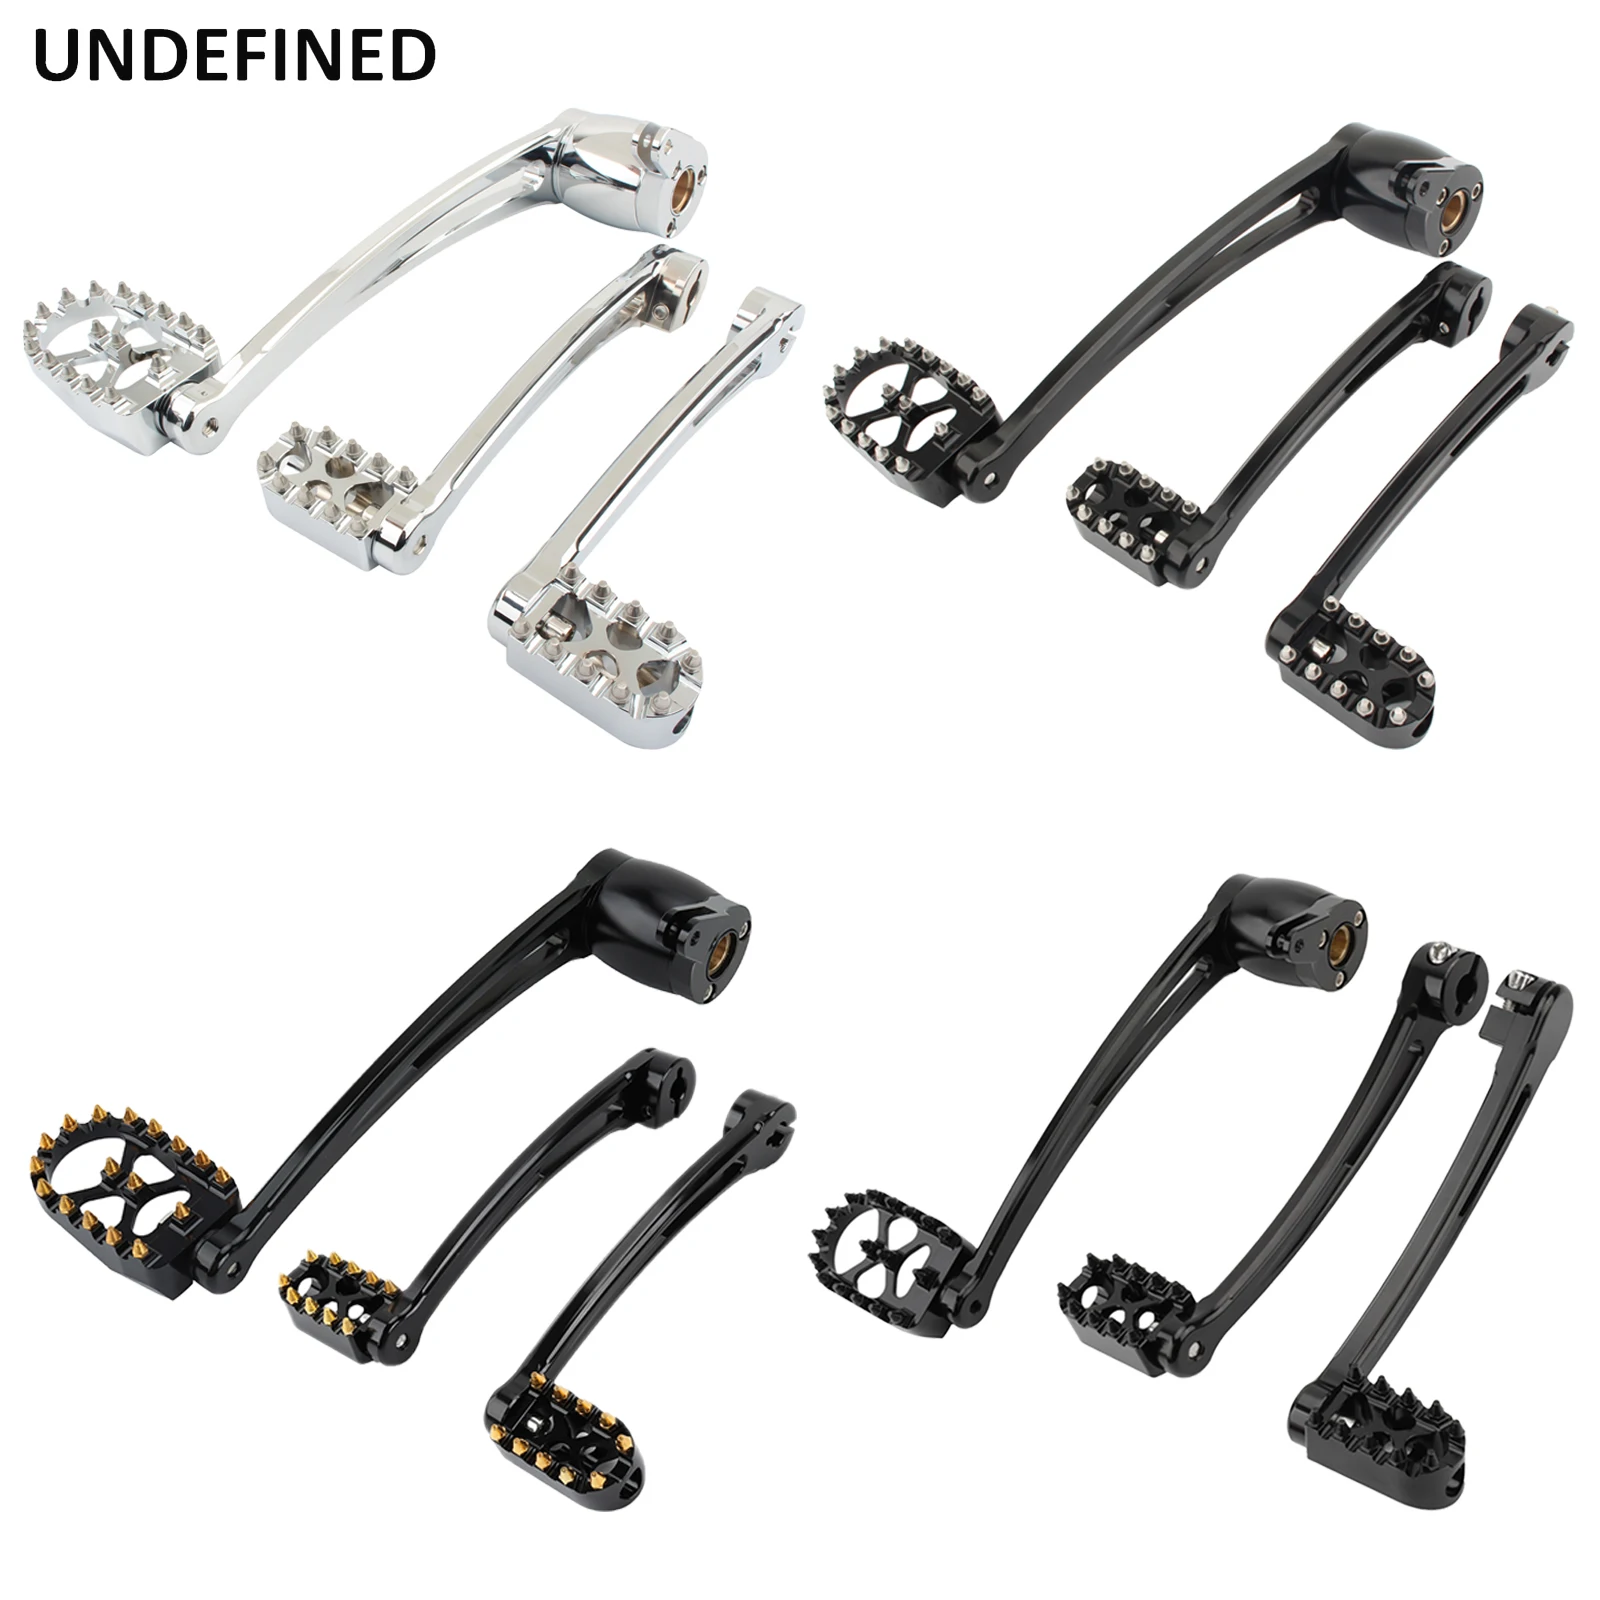 Brake Arm Kit Motorcycle MX Heel Shift Lever Shifter Pegs Pedal Black Chrome For Harley Touring Road King Street Glide 2014-2022